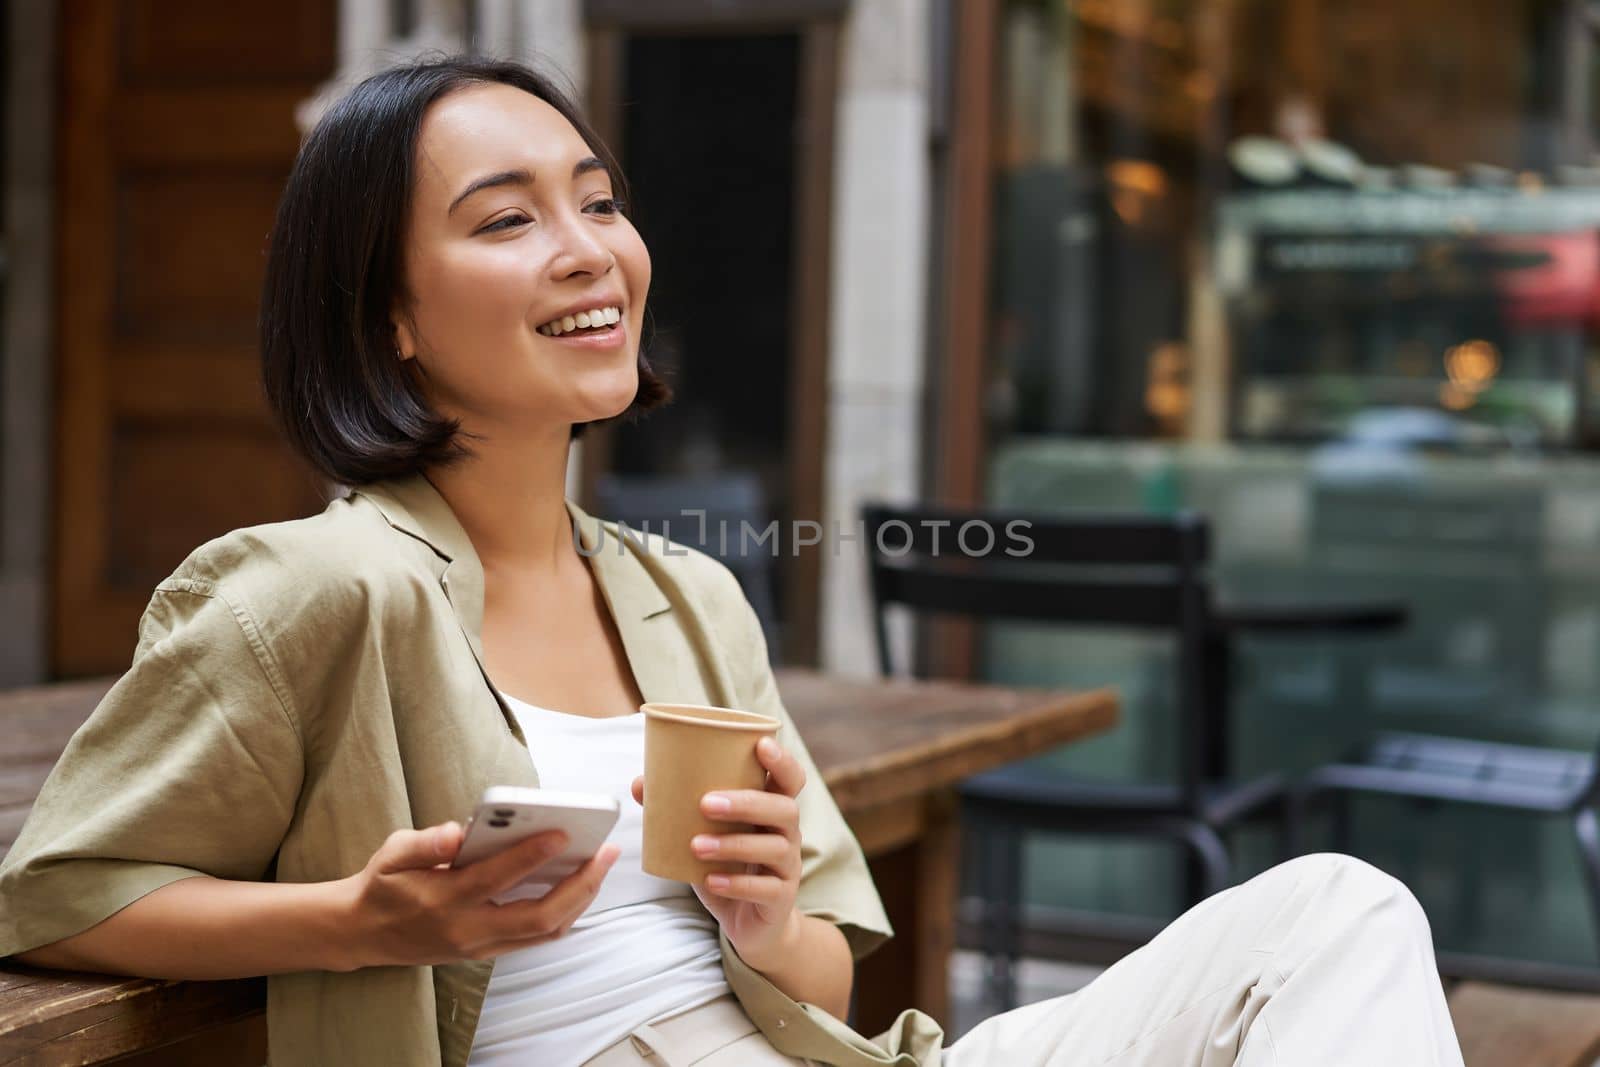 Stylish urban girl sits with her phone in cafe, drinks coffee and chatting, browsing social media on smartphone.